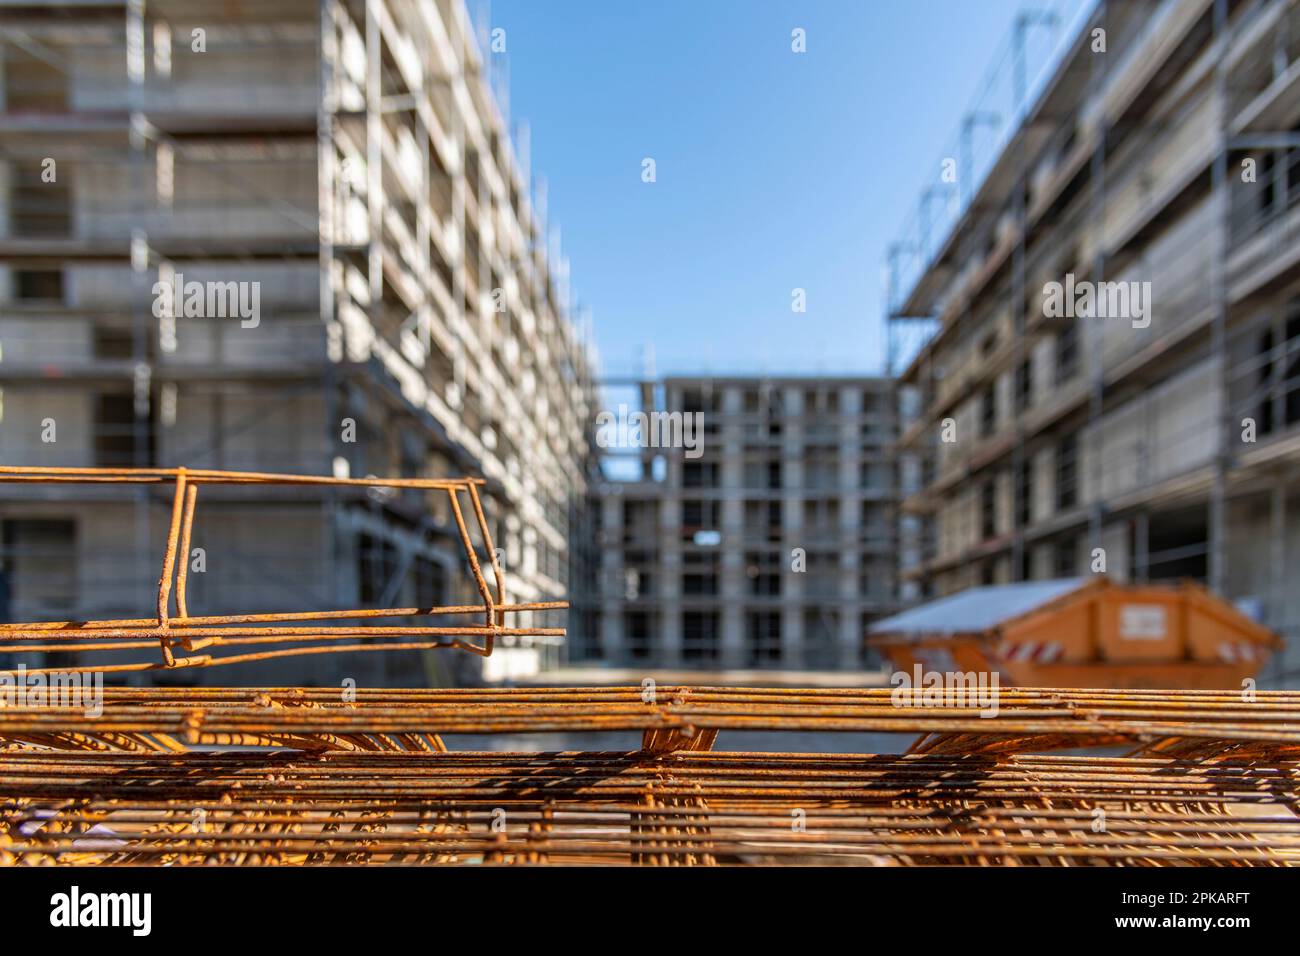 Rusty steel probation lies stacked on the ground at a large construction site with multi-story buildings in the shell in the background Stock Photo